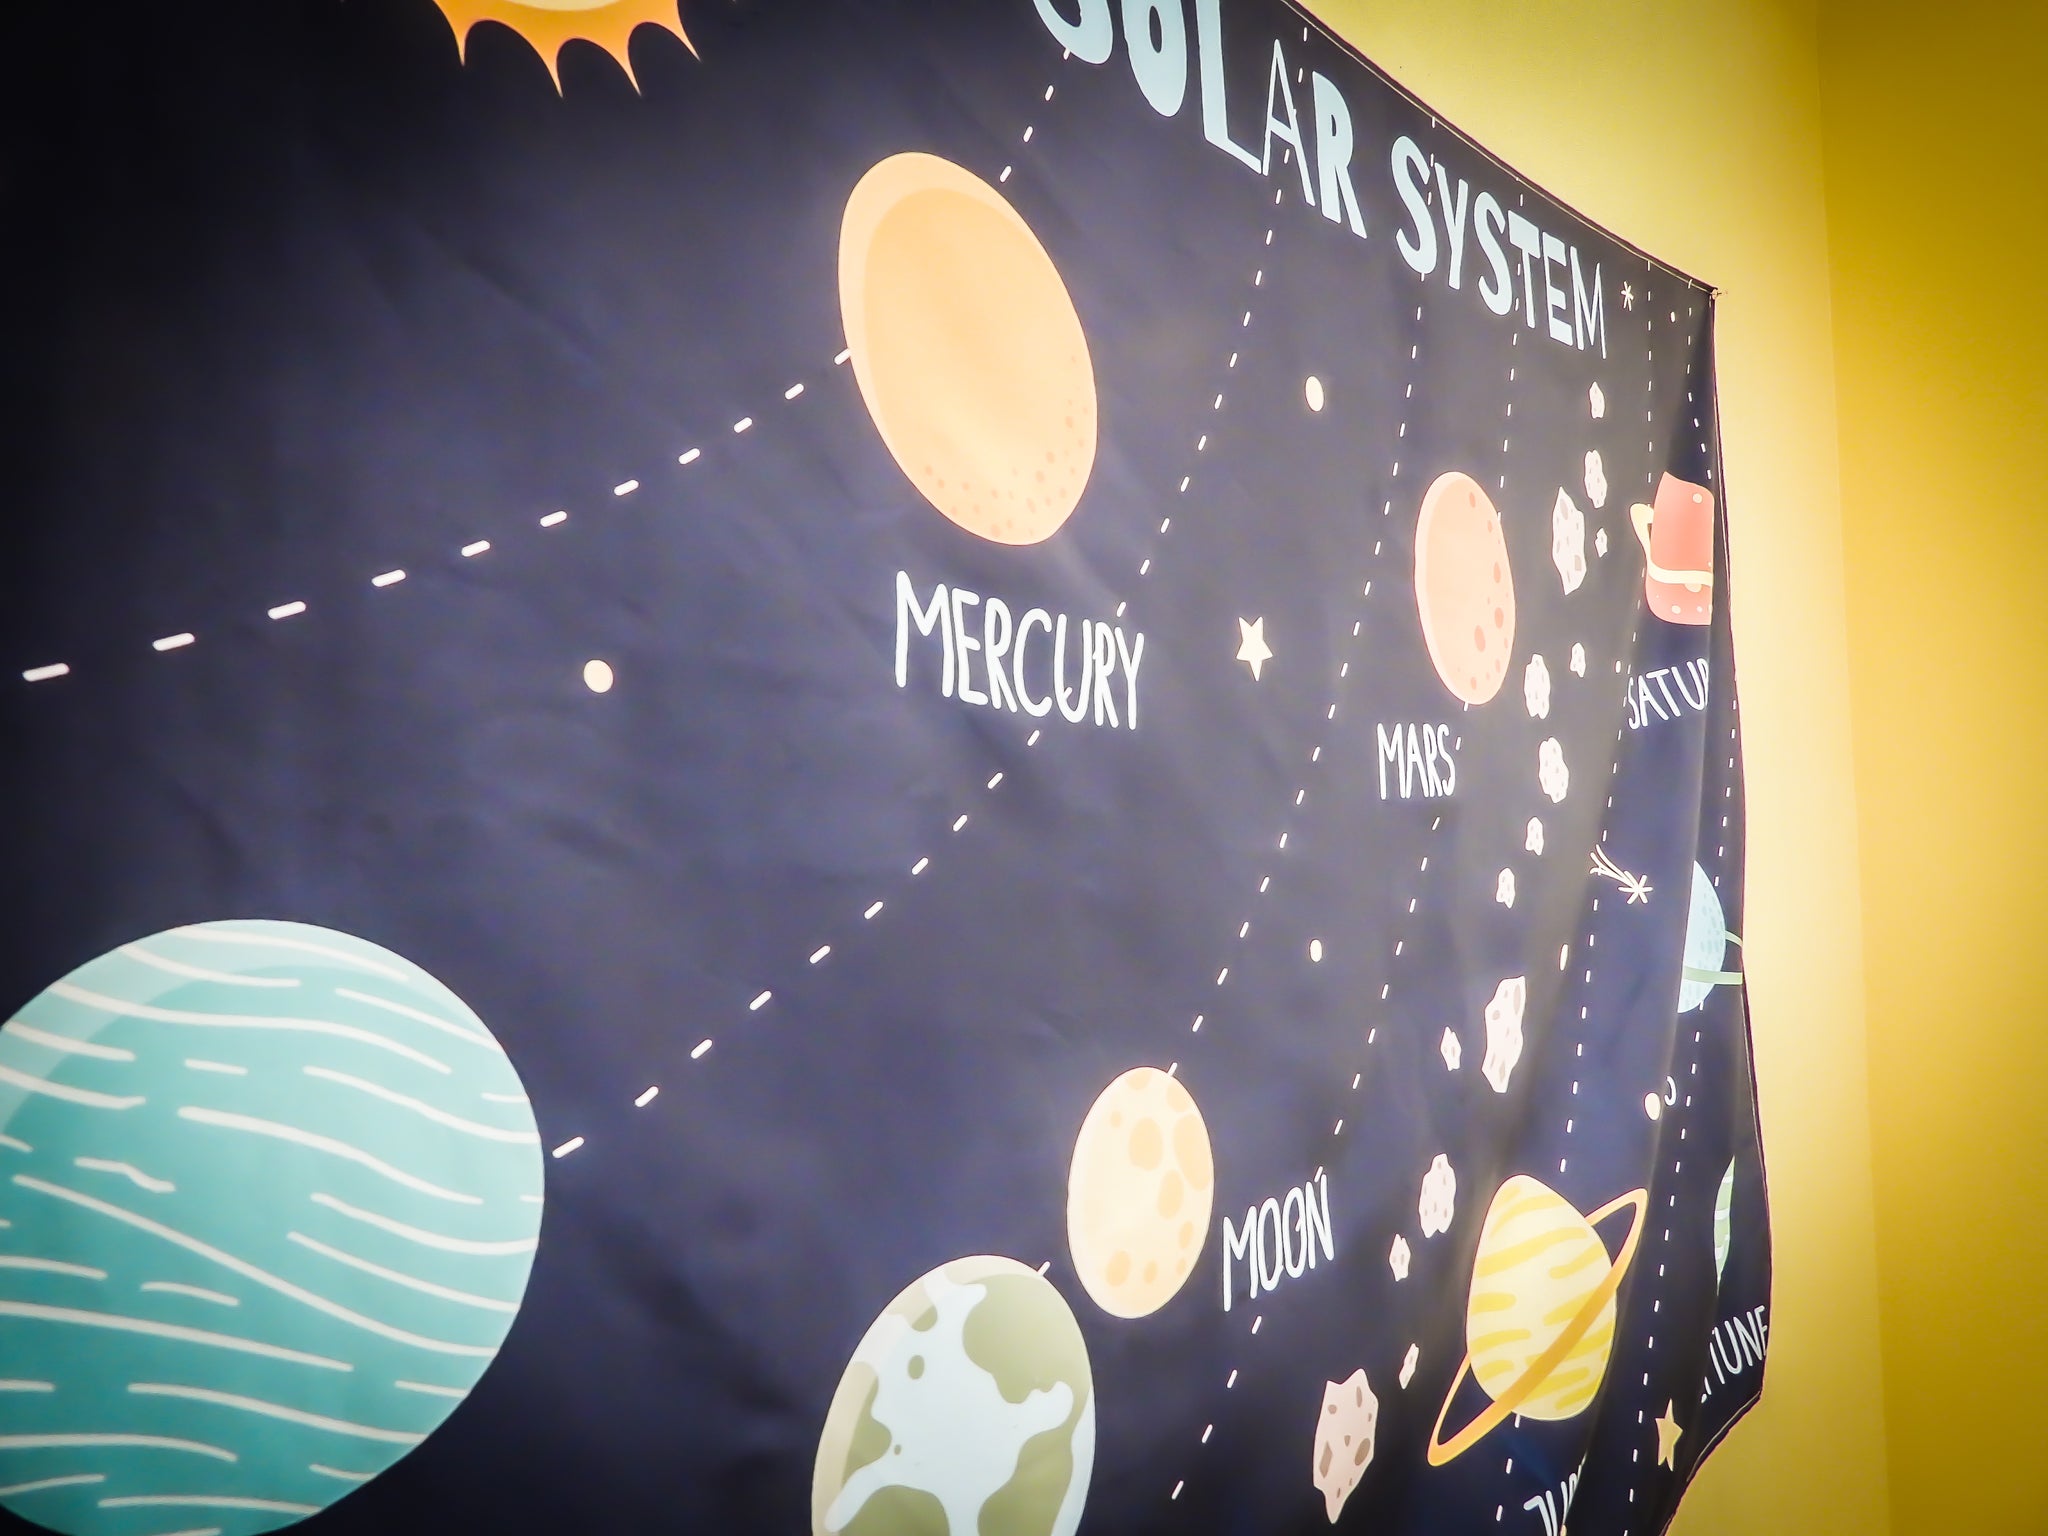 Solar system project ideas for school